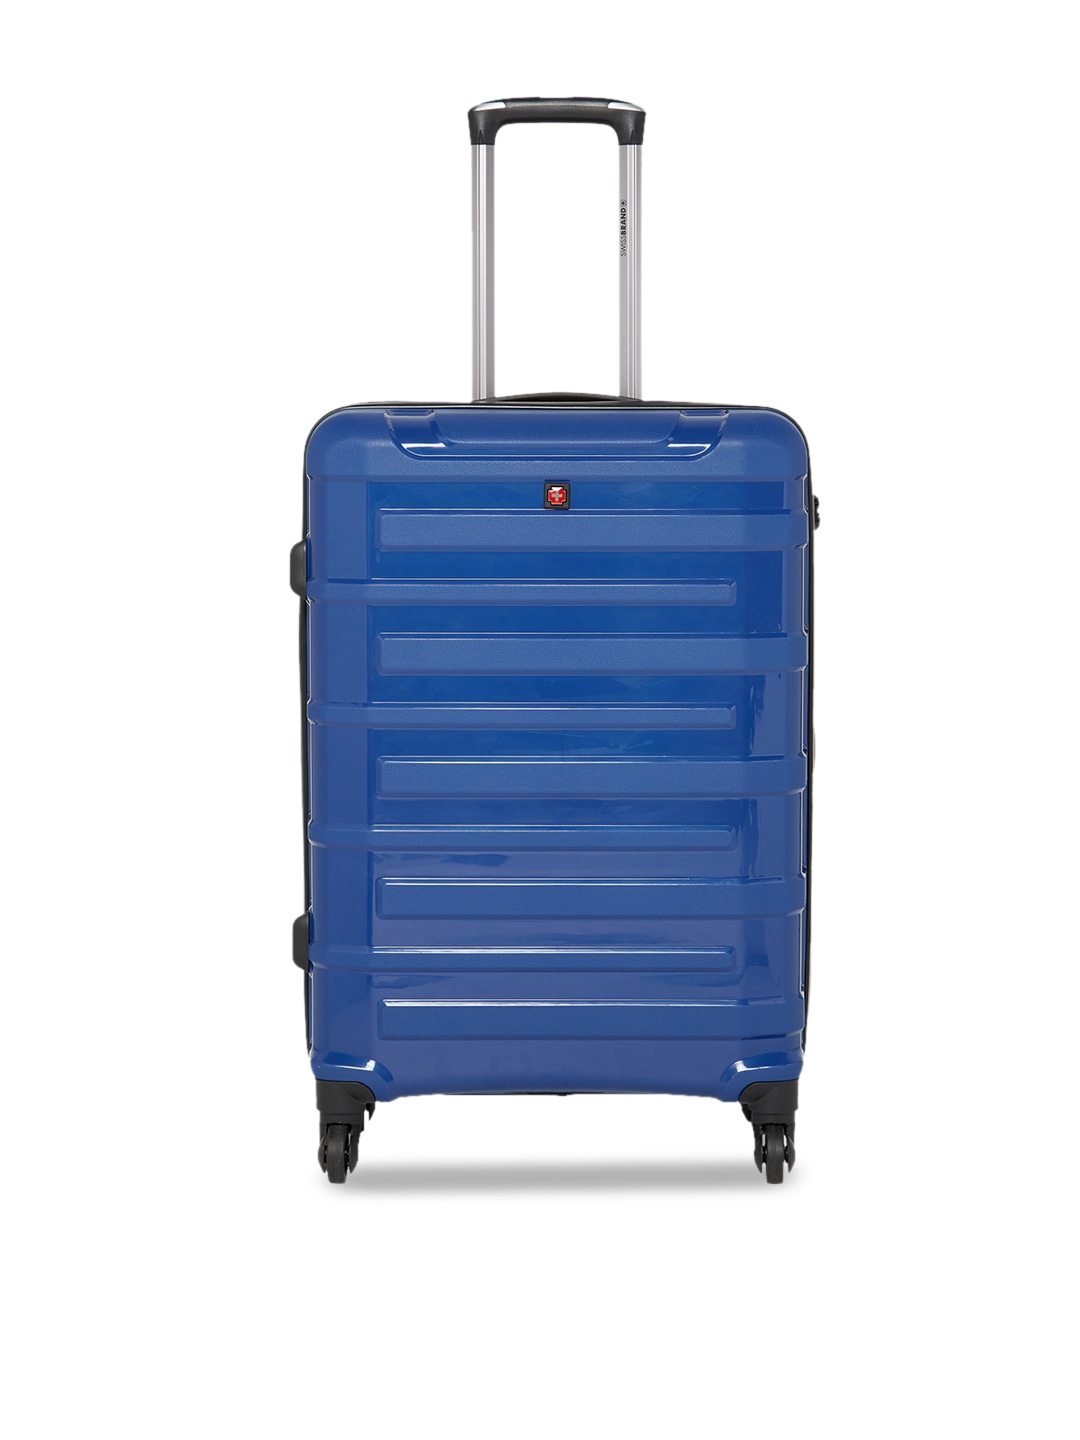 SWISS BRAND Blue & Black Colourblocked SION 360-Degree Rotation Hard-Sided Medium Trolley Suitcase Price in India